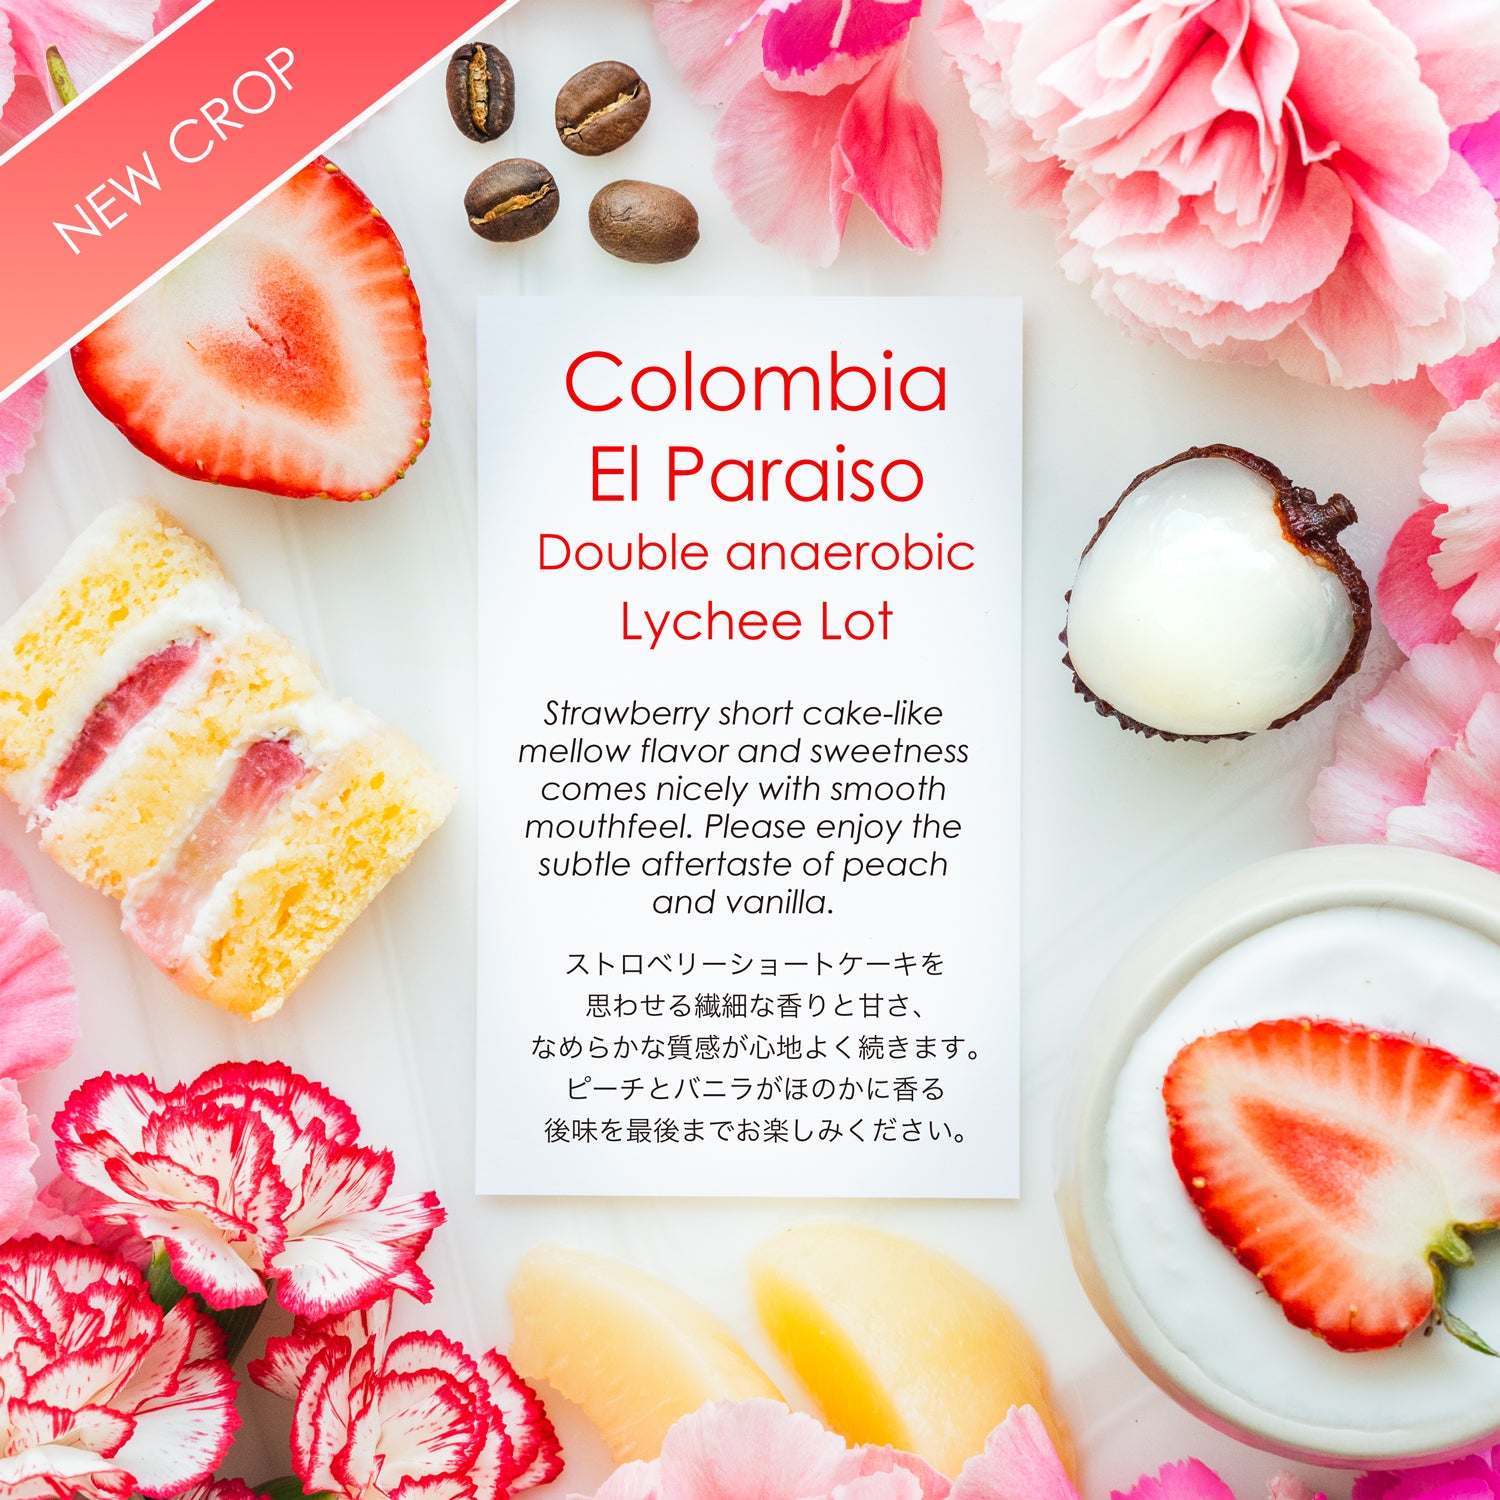 El Paraiso Double Anaerobic lychee lot [Strawberry short cake-like flavor]